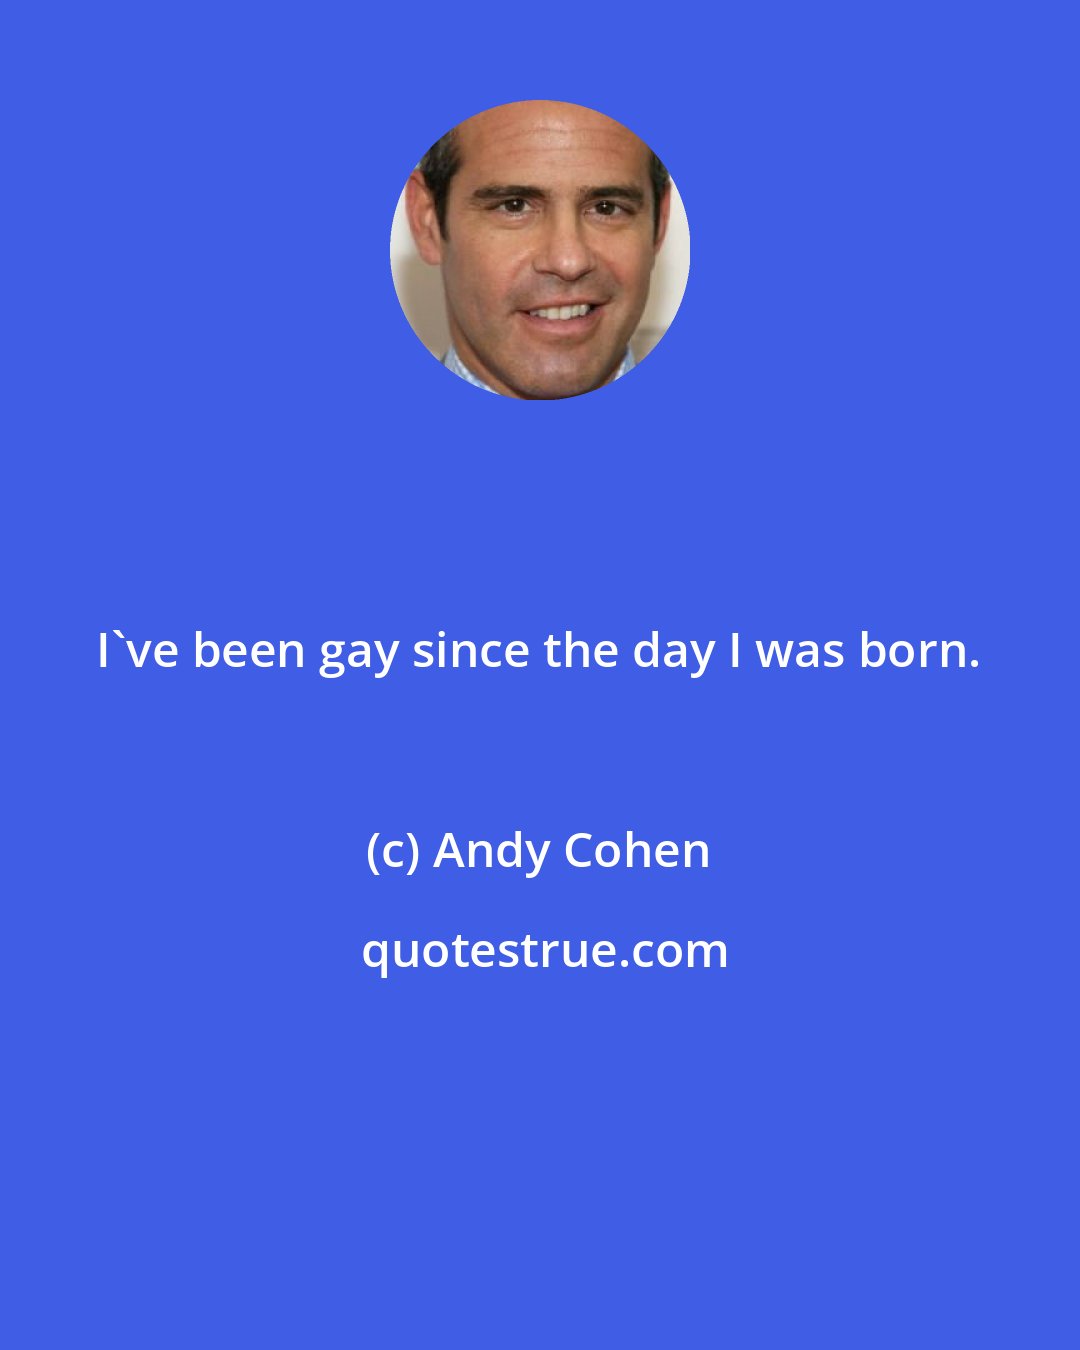 Andy Cohen: I've been gay since the day I was born.